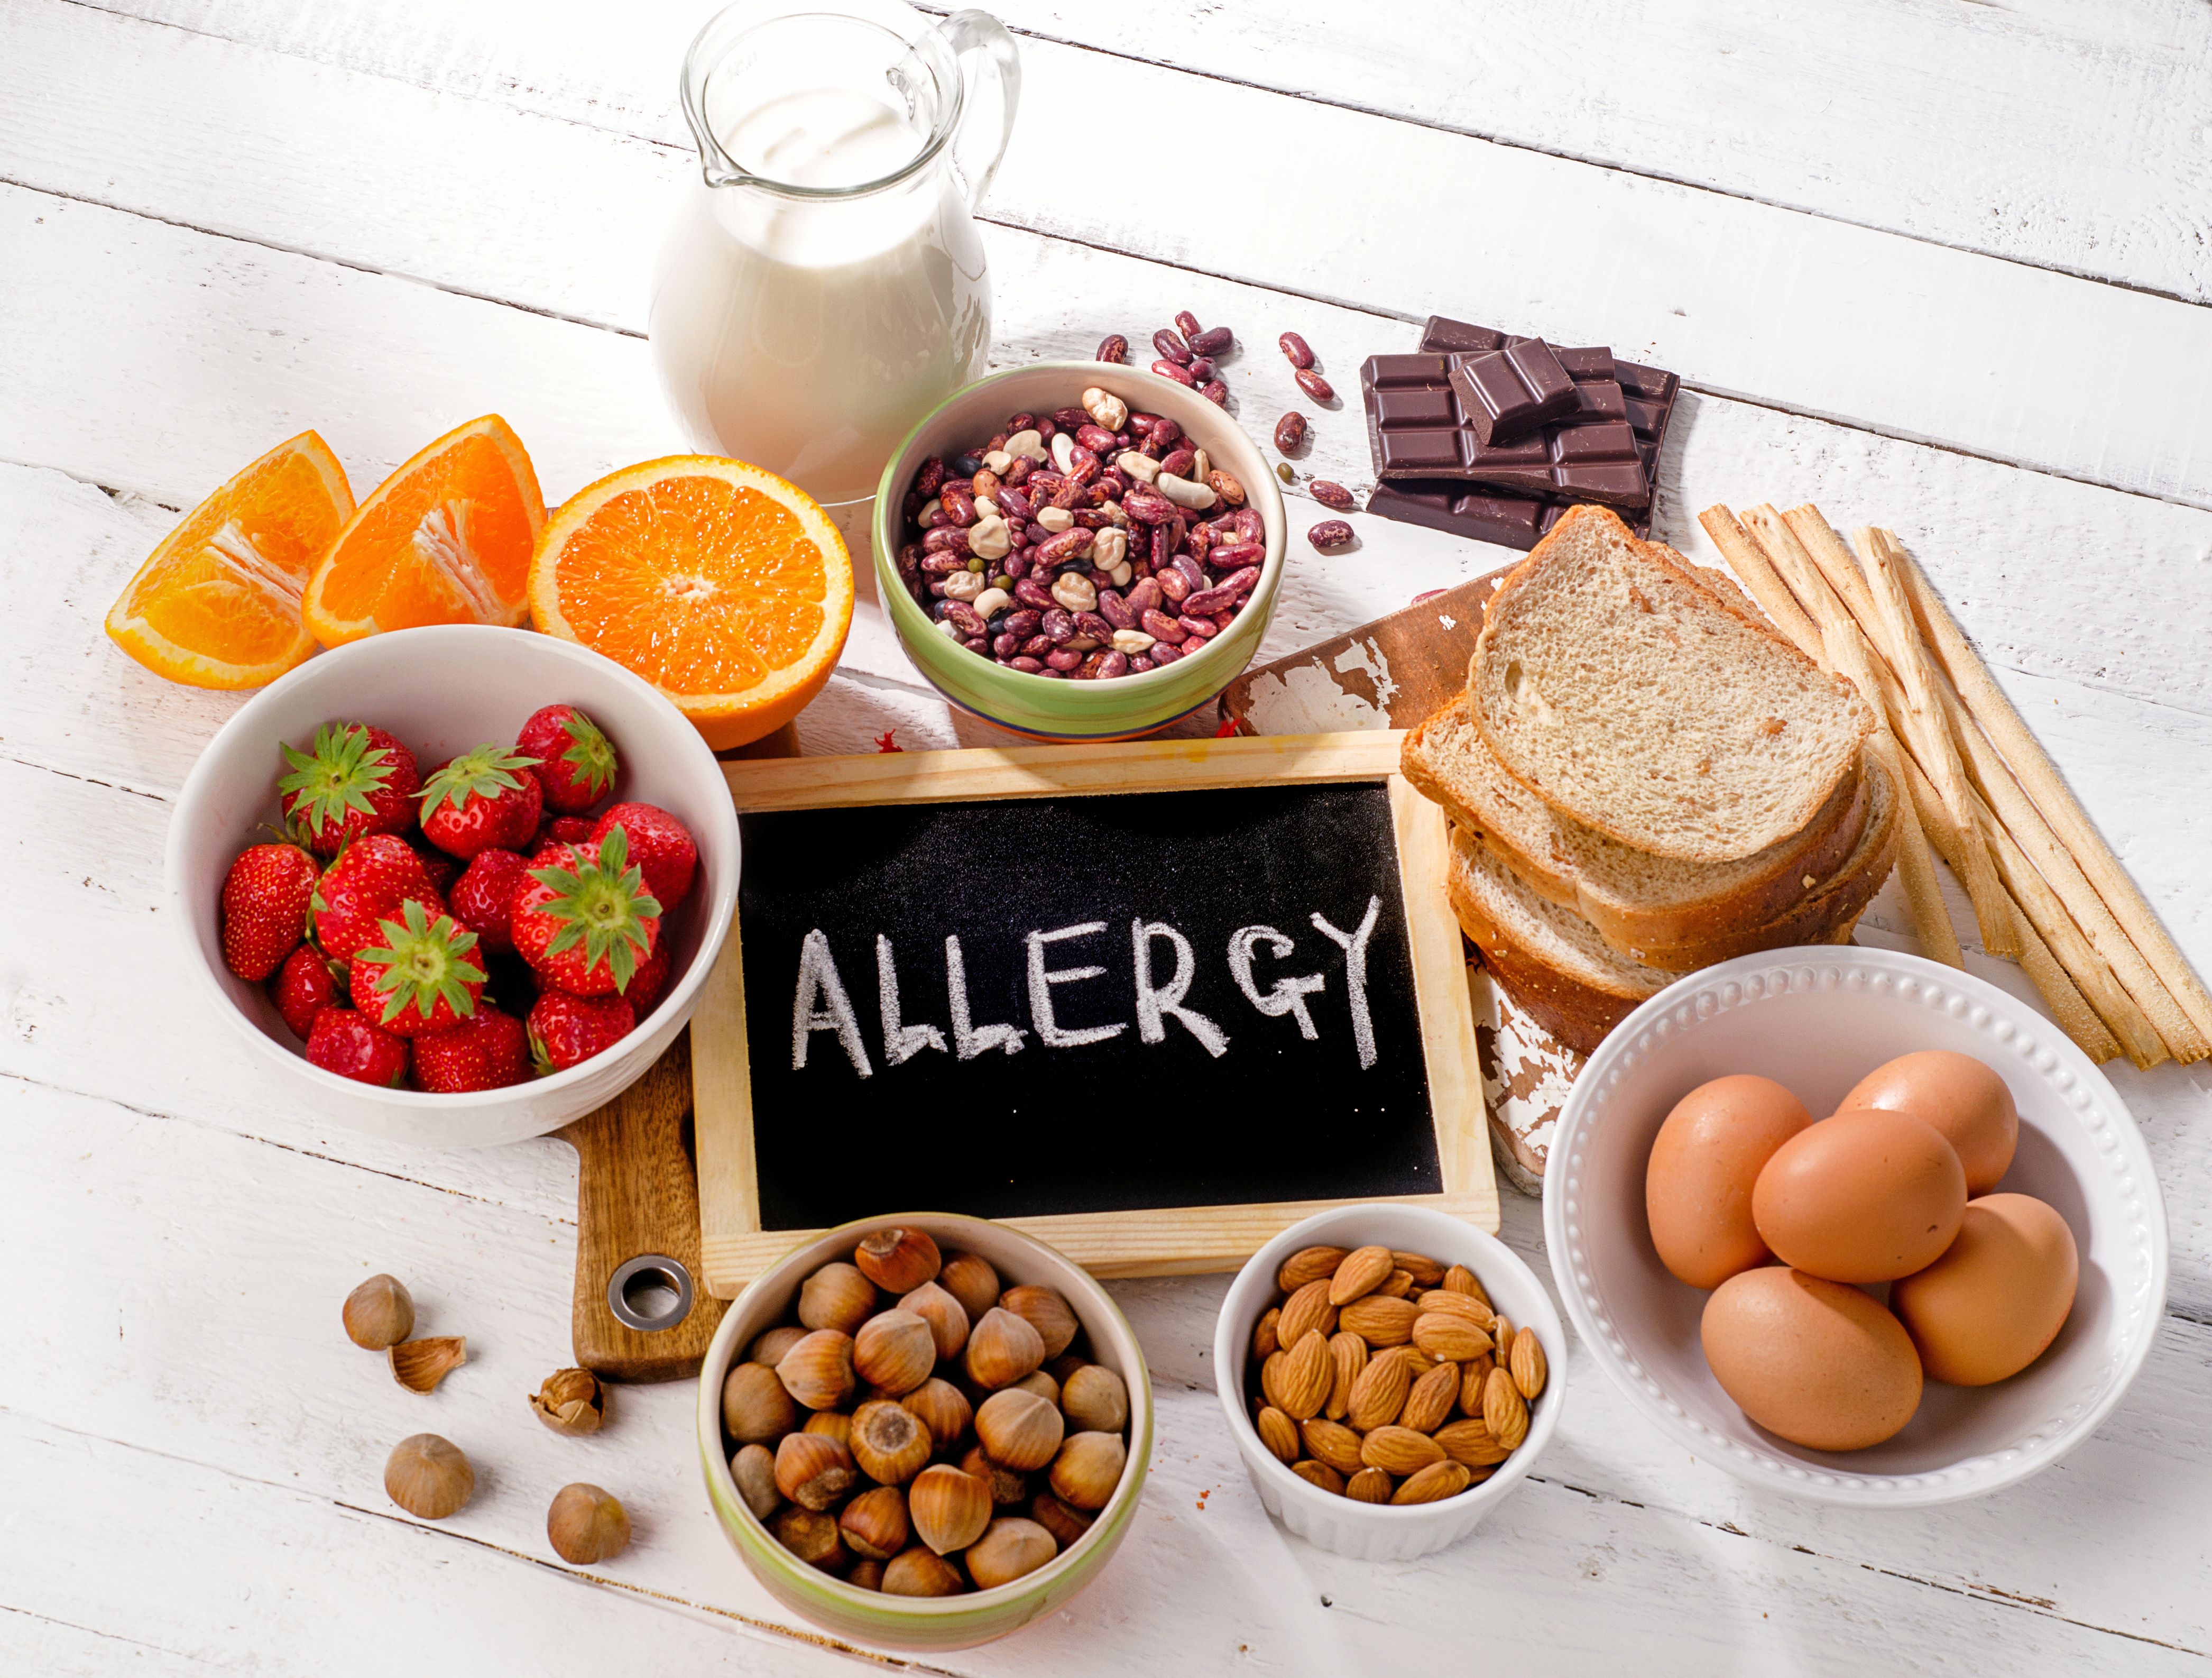 Addressing the Mental Health Impact of Food Allergy in Children: Nutritional Interventions as a Potential Solution